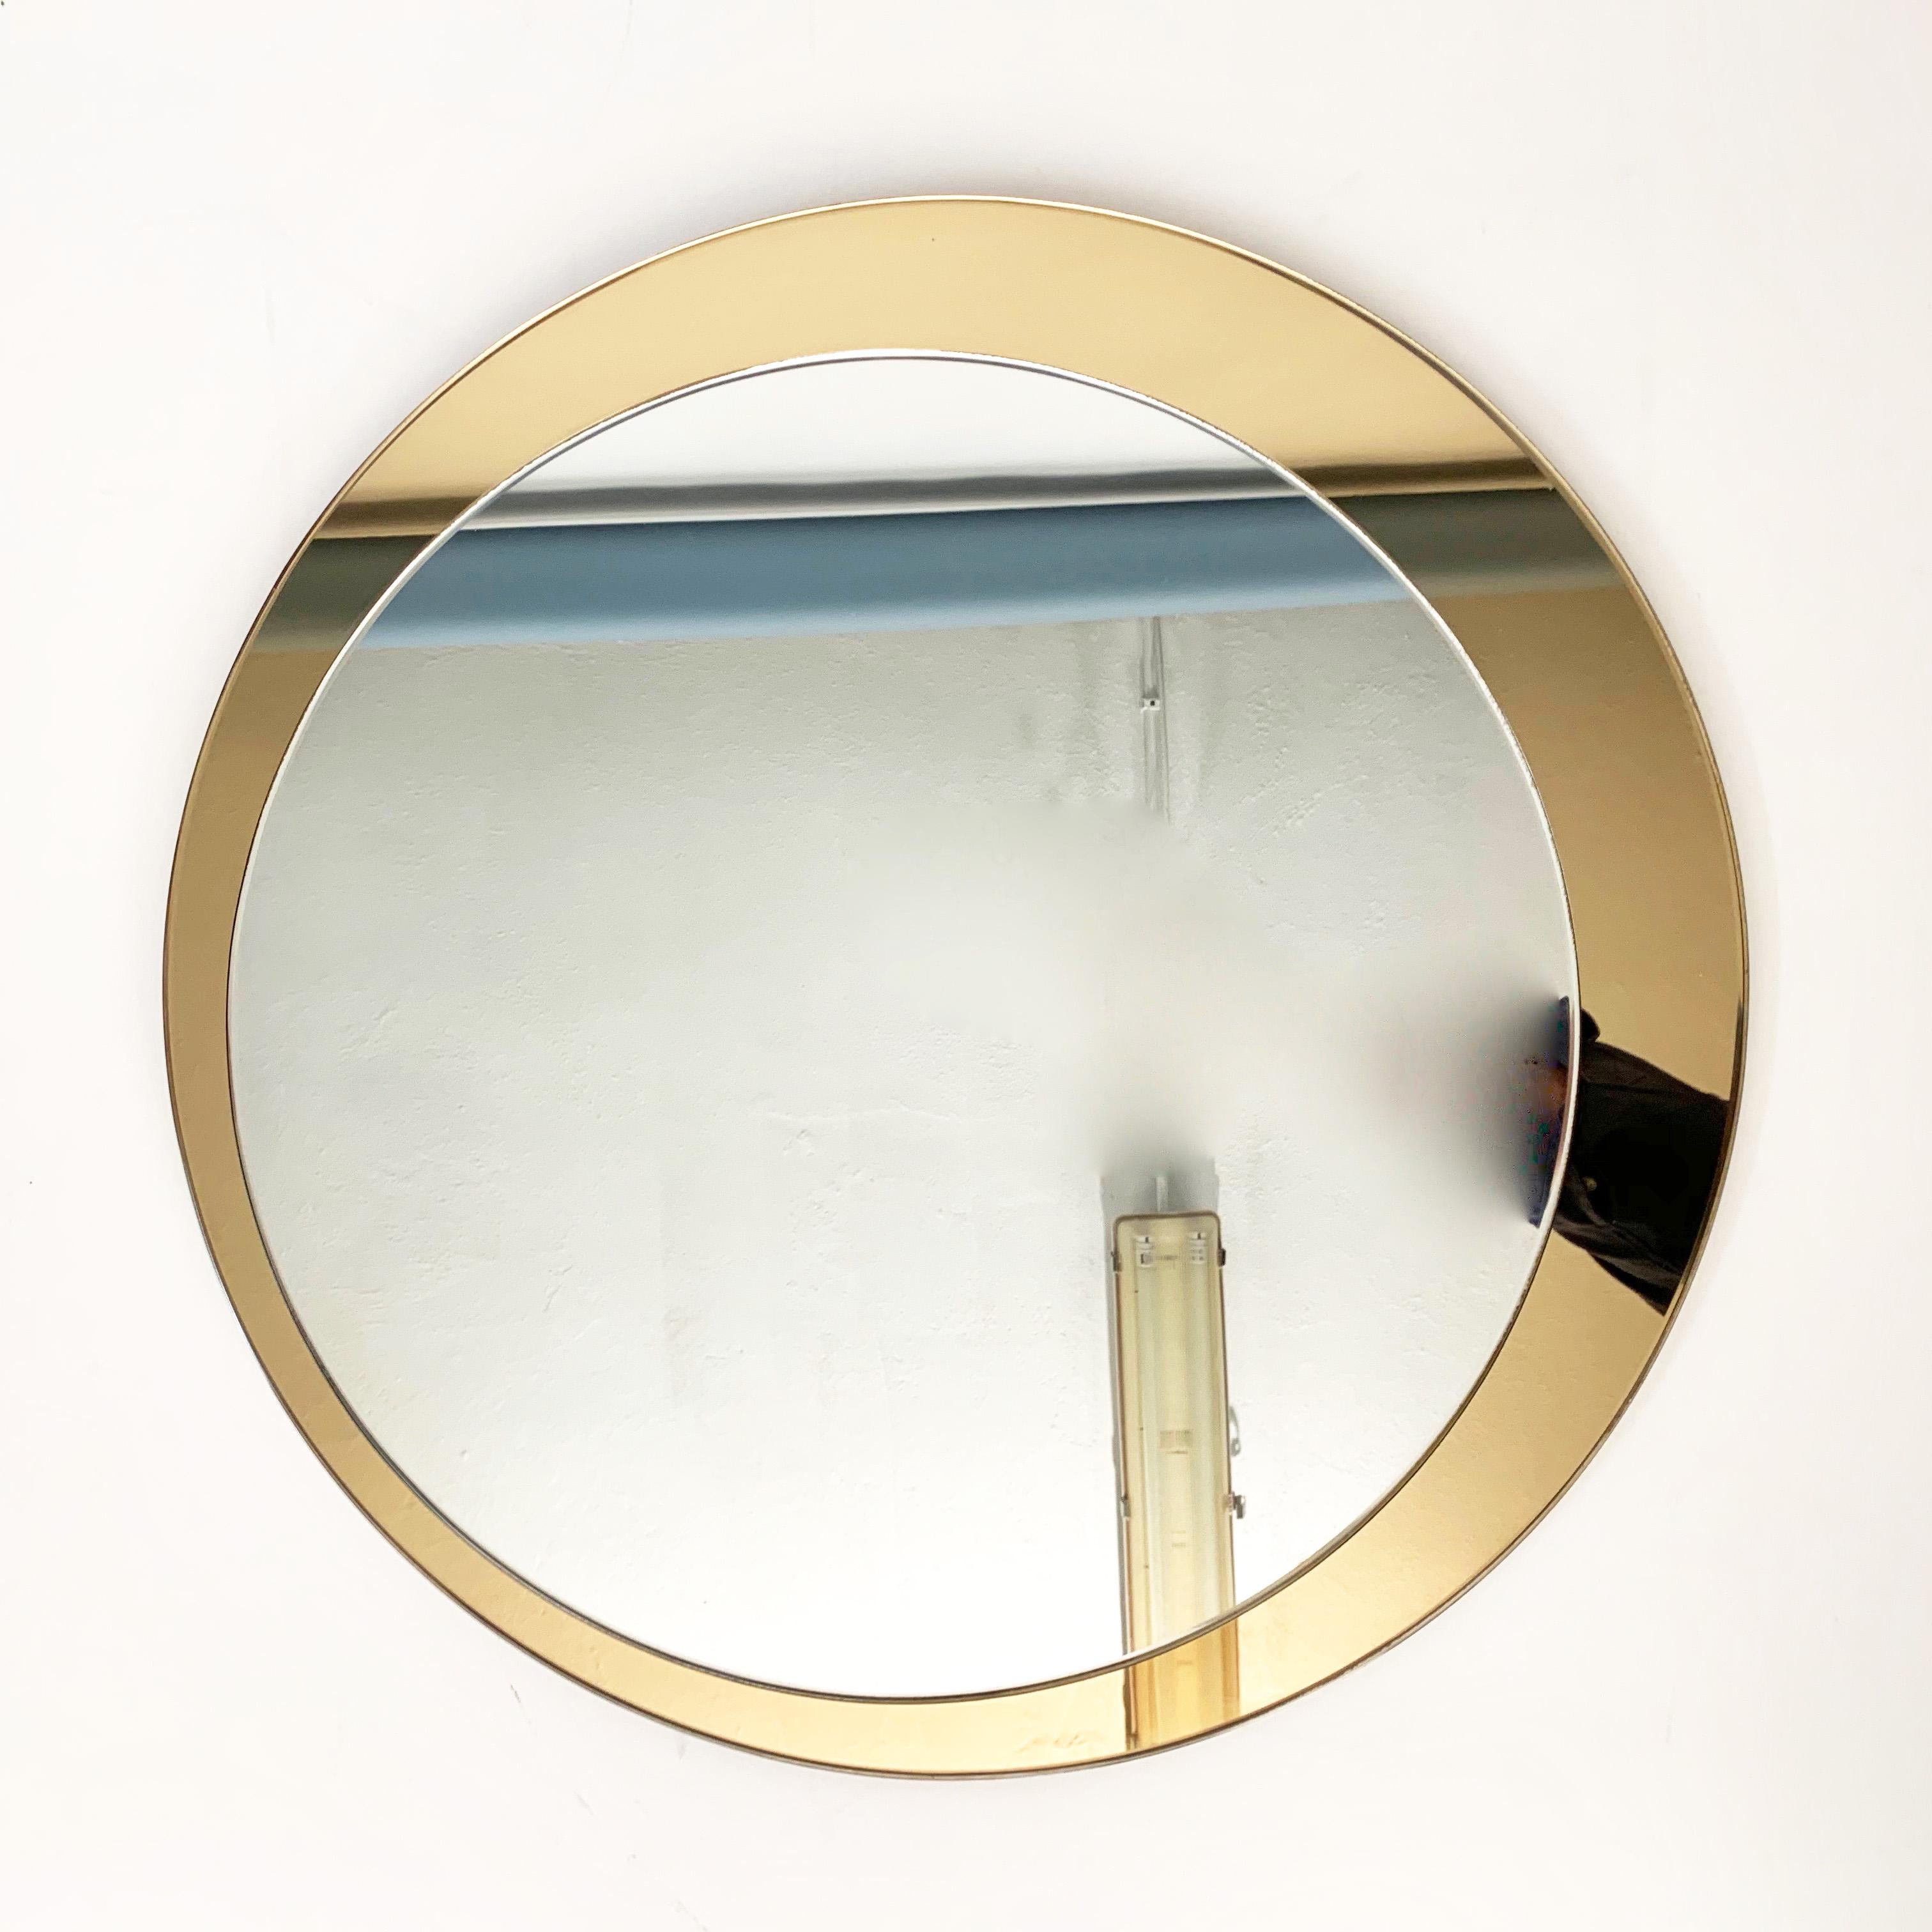 Bronzed Galimberti Midcentury Italian Round Mirror with Double Brassed Gold Frame, 1975 For Sale